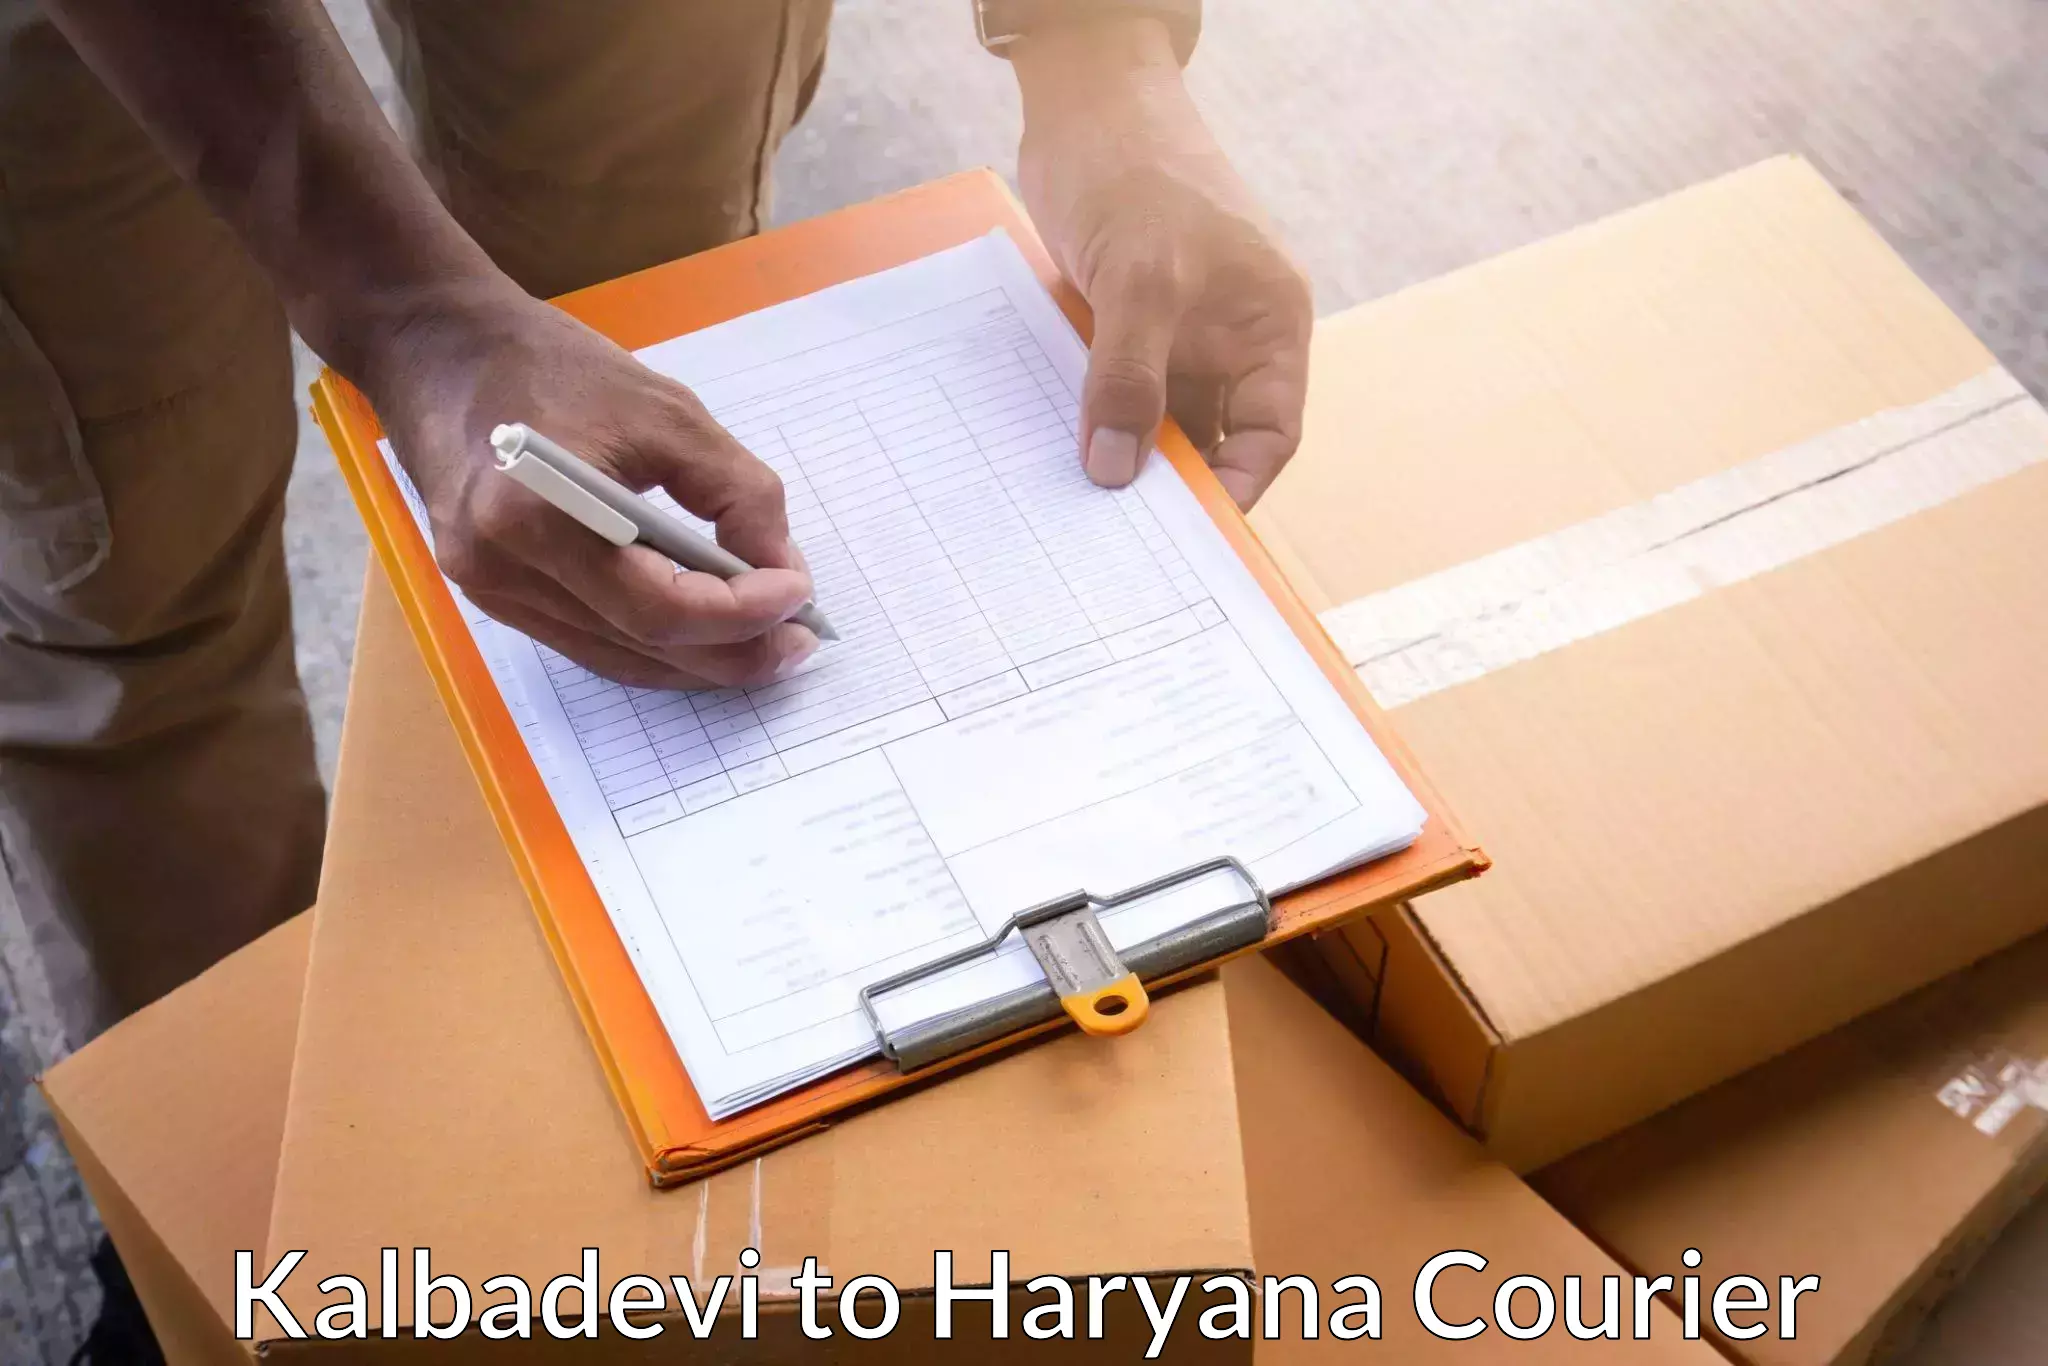 International courier rates in Kalbadevi to NCR Haryana